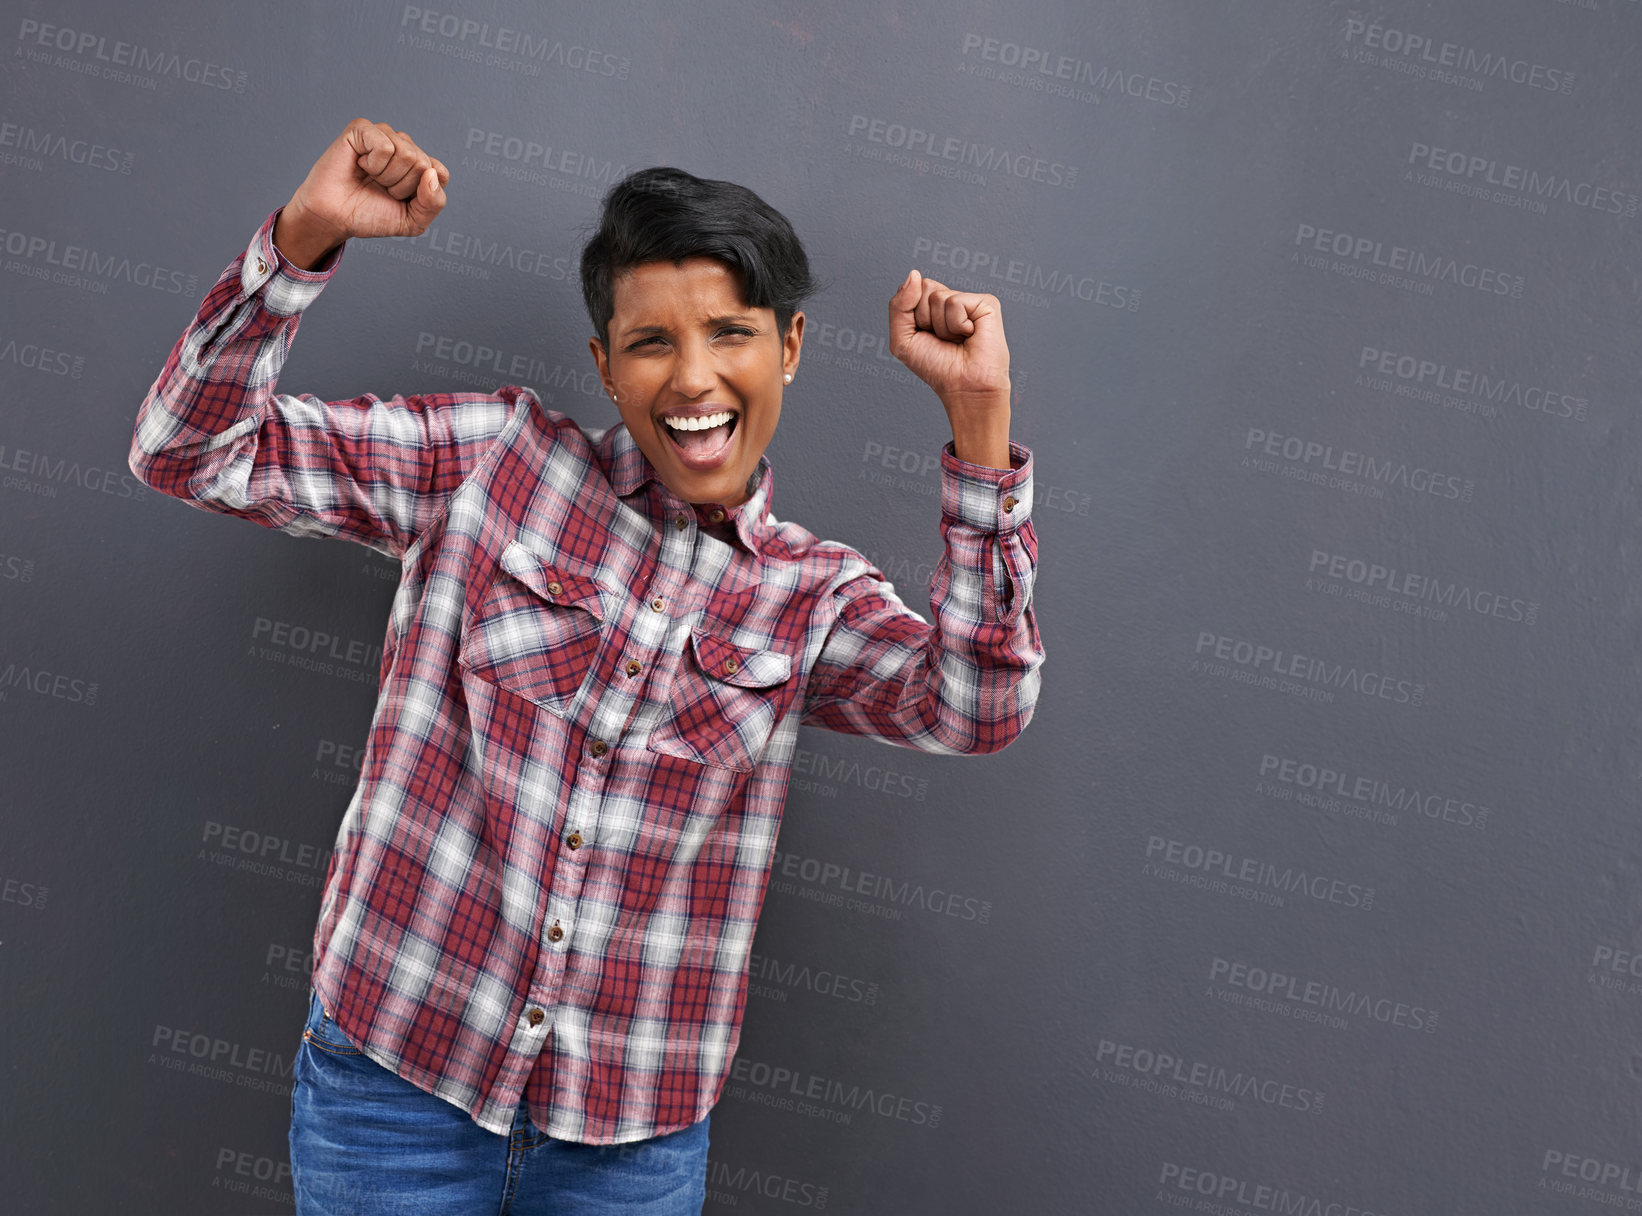 Buy stock photo Portrait of a happy young woman standing on a gray background